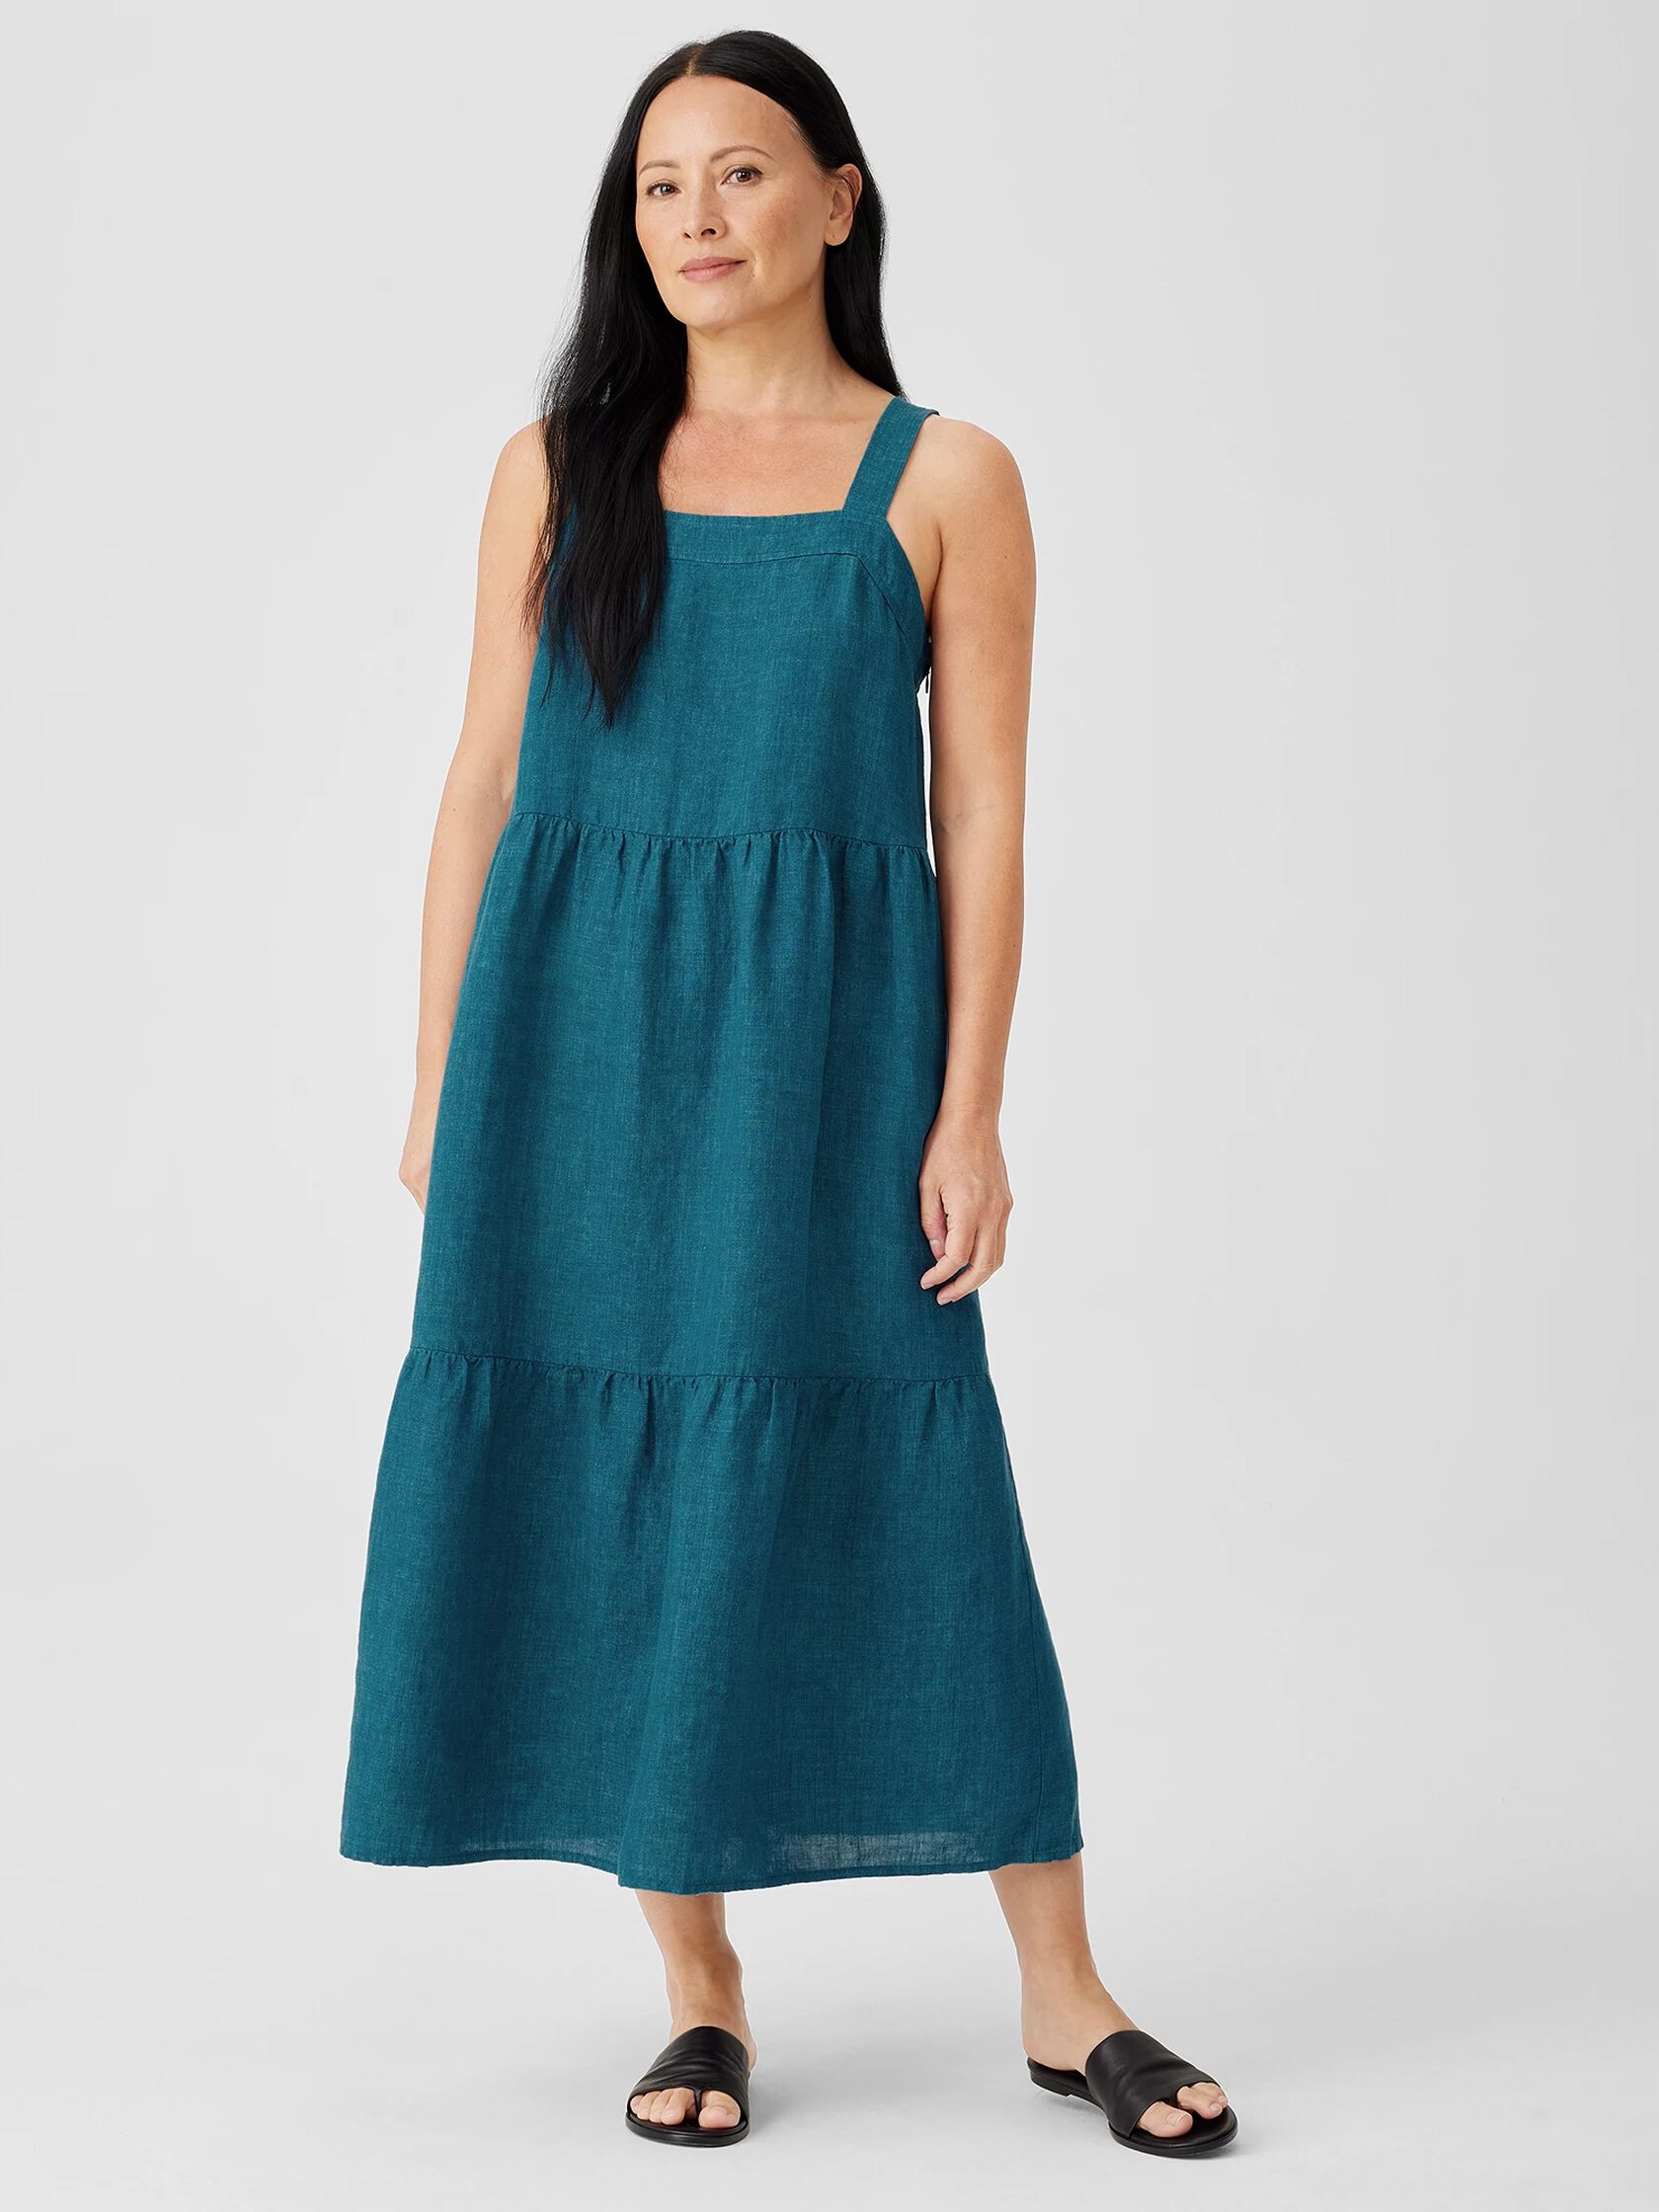 Washed Organic Linen Delave Tiered Dress